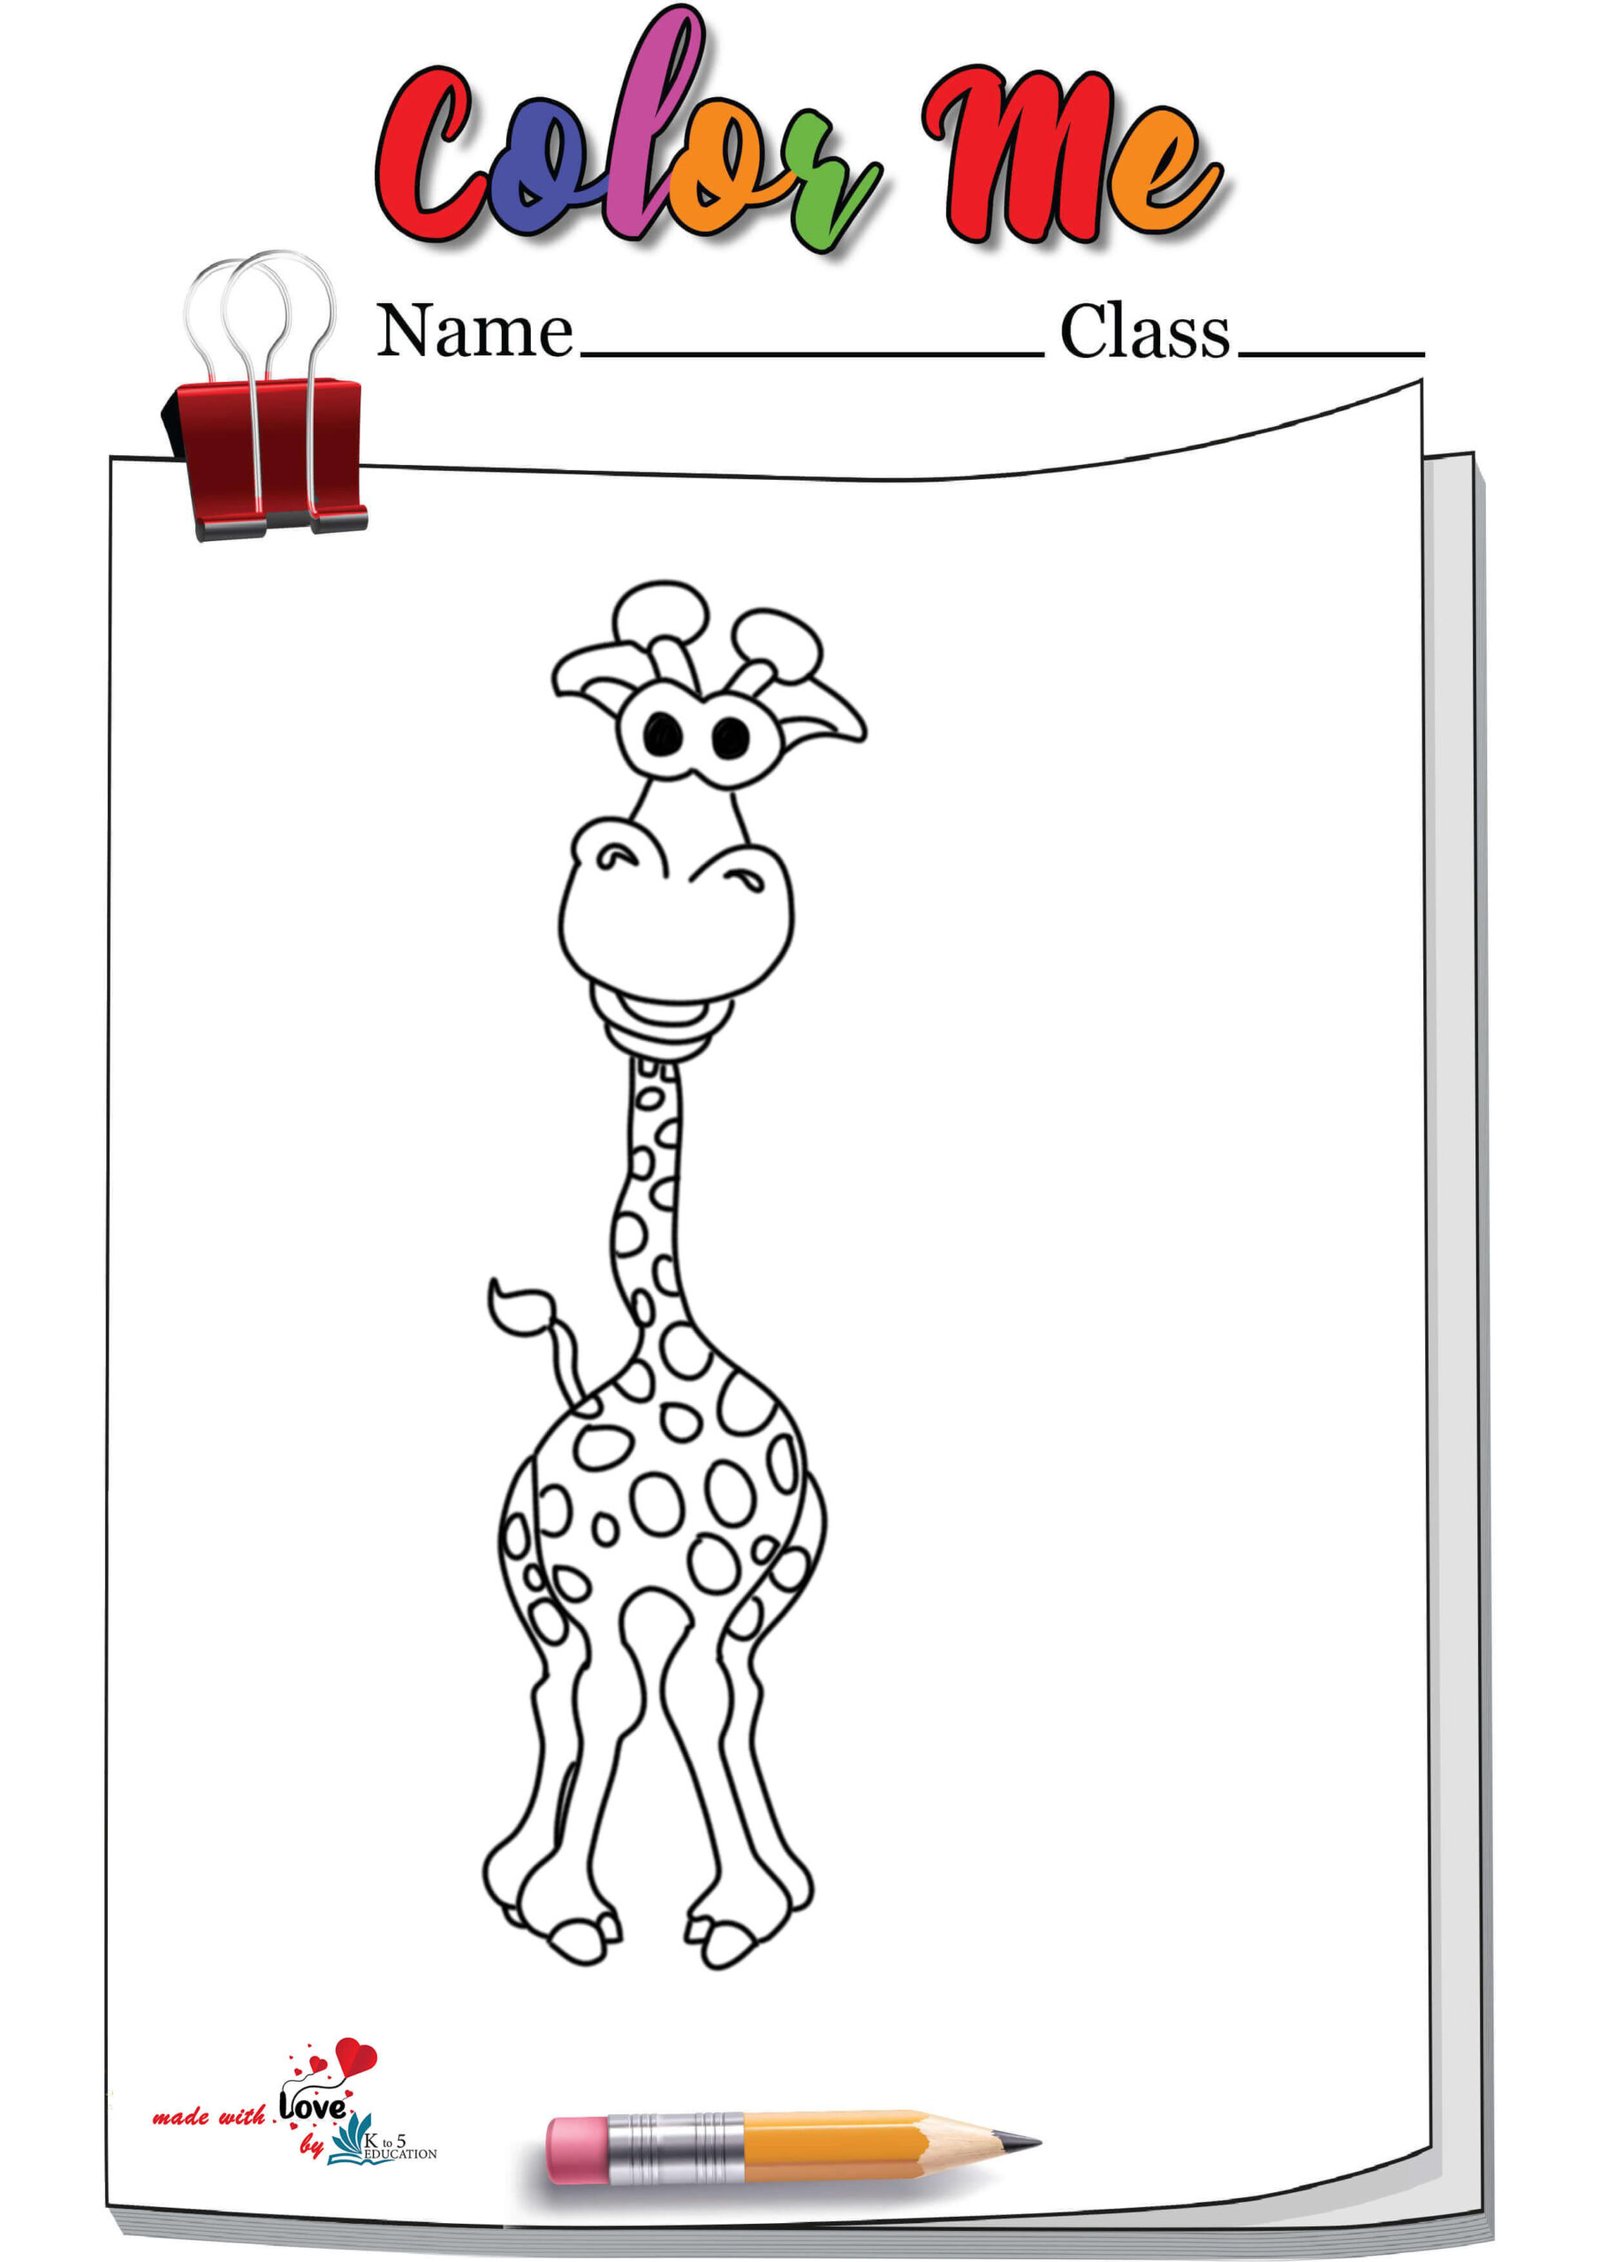 Funny Giraffe Coloring Page